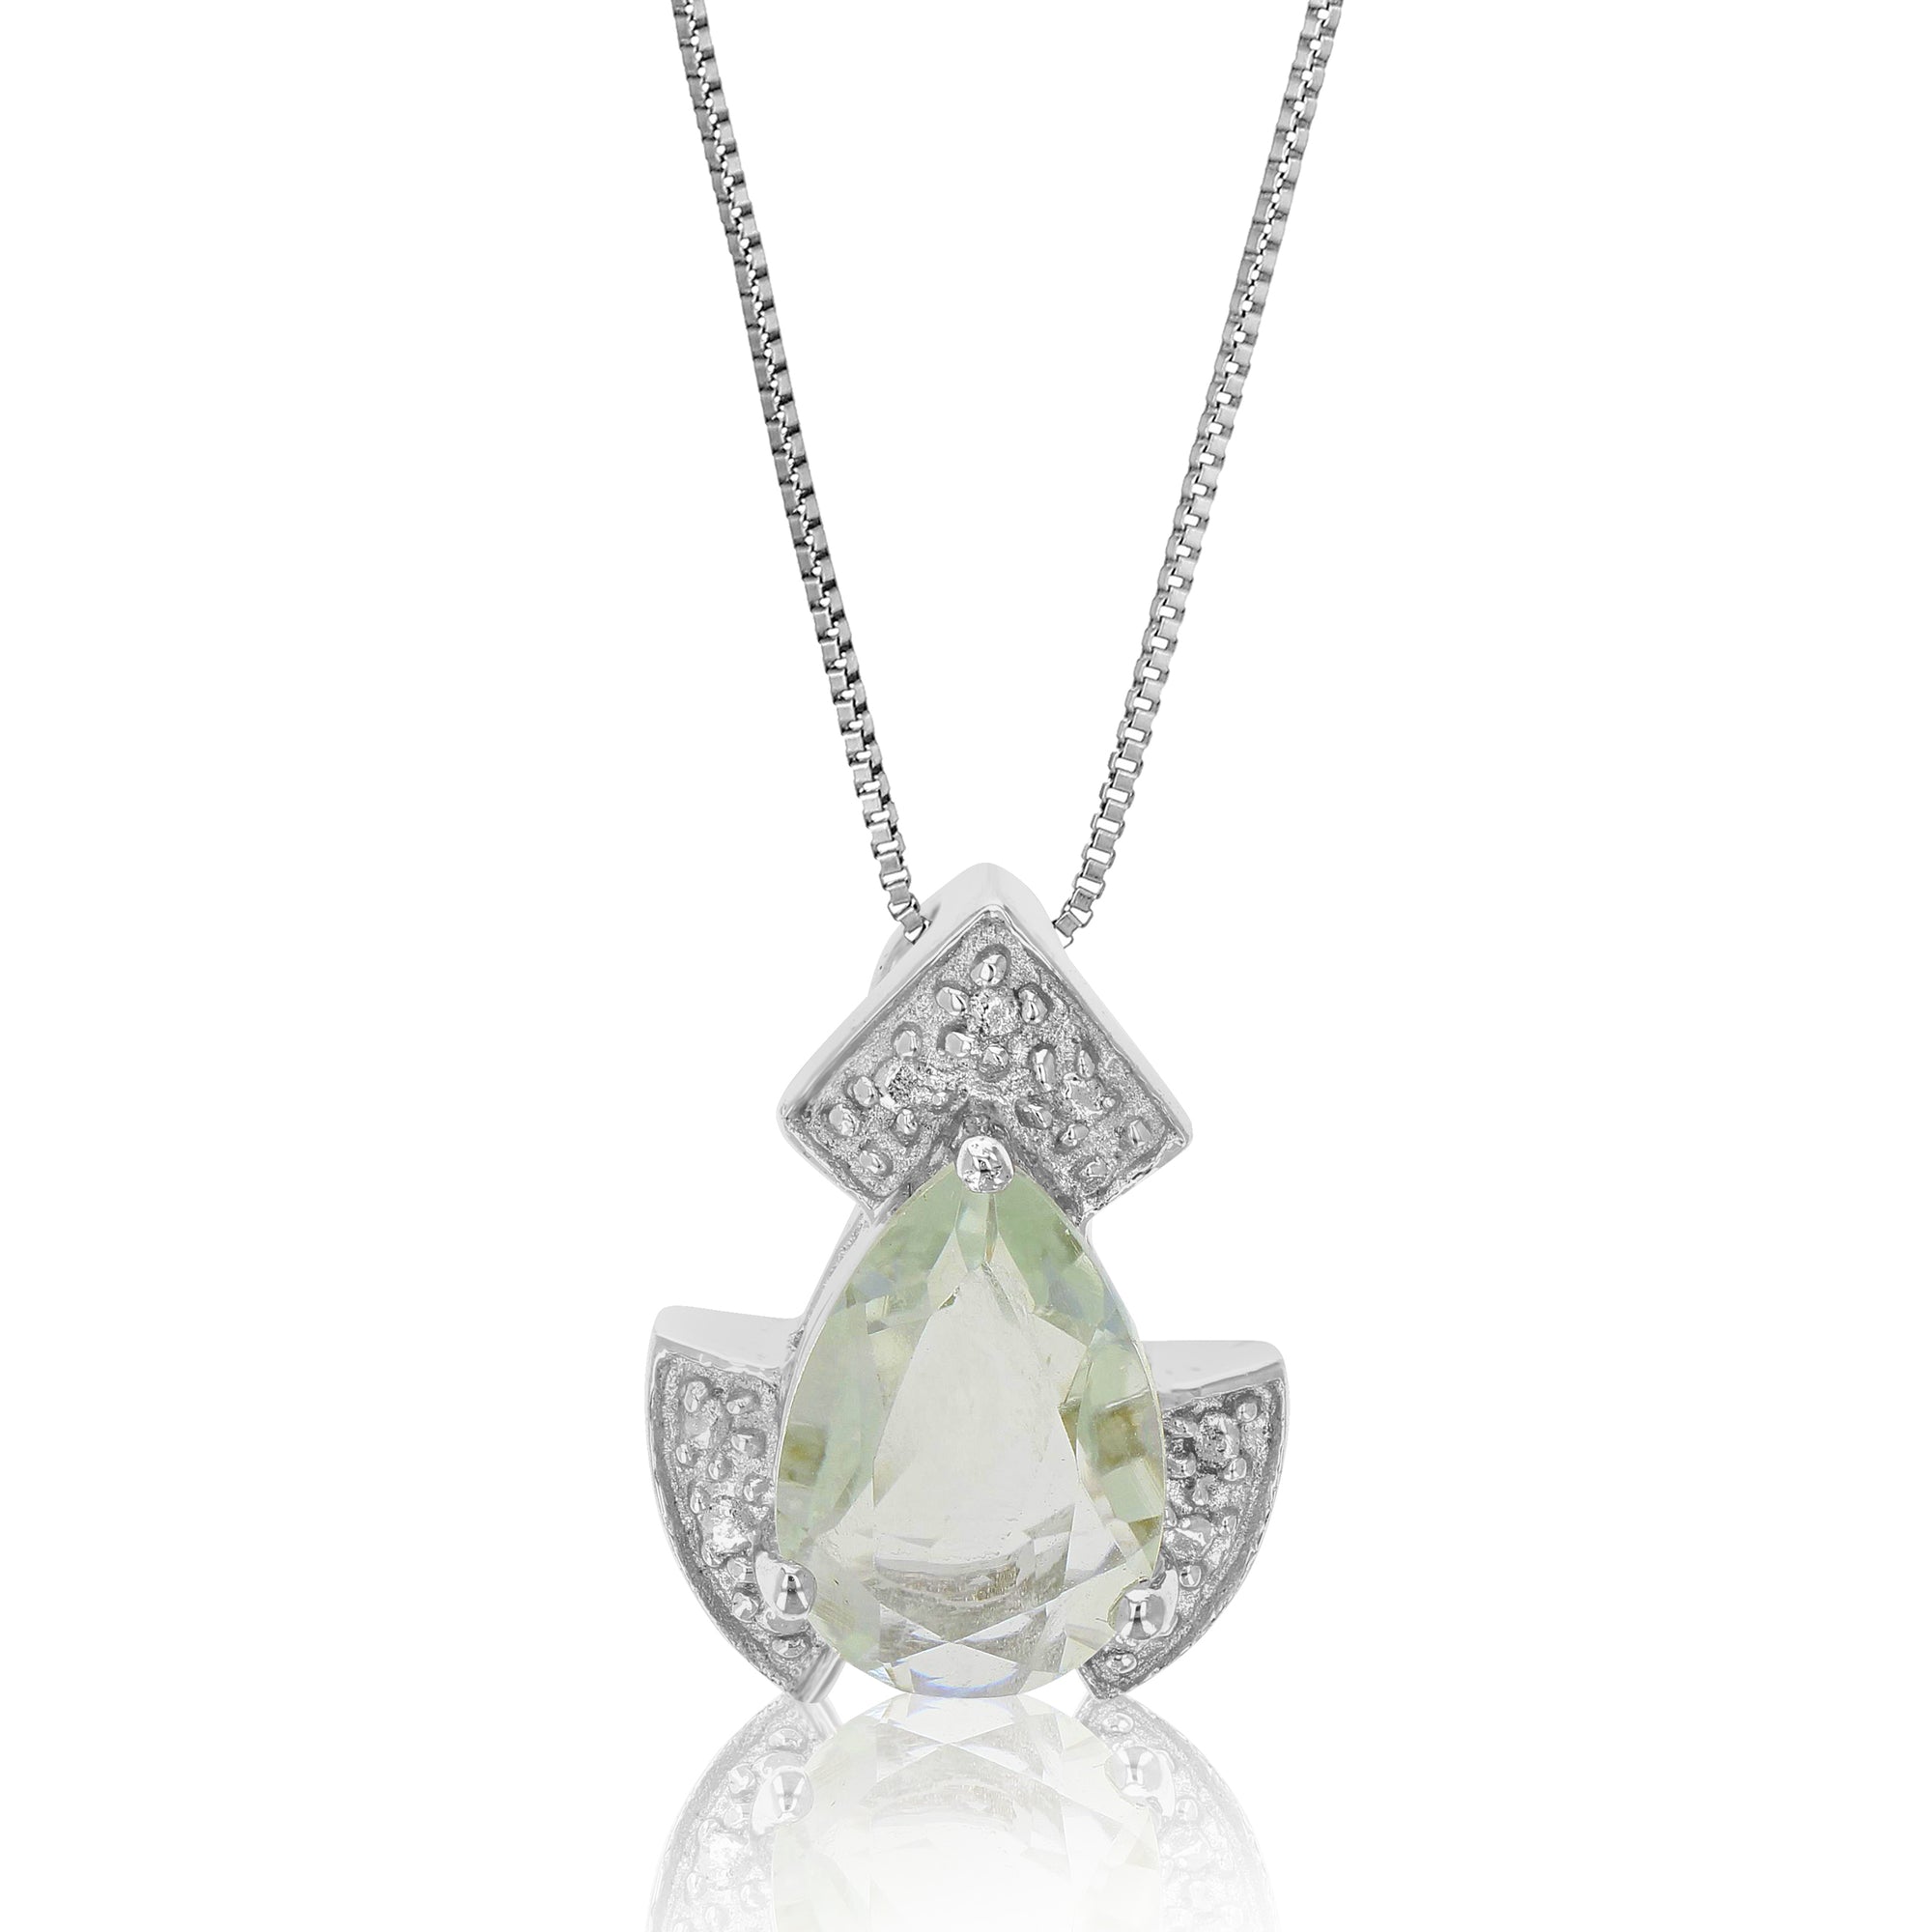 1.10 cttw Pendant Necklace, Green Amethyst Pear Shape Pendant Necklace for Women in .925 Sterling Silver with Rhodium, 18 Inch Chain, Prong Setting